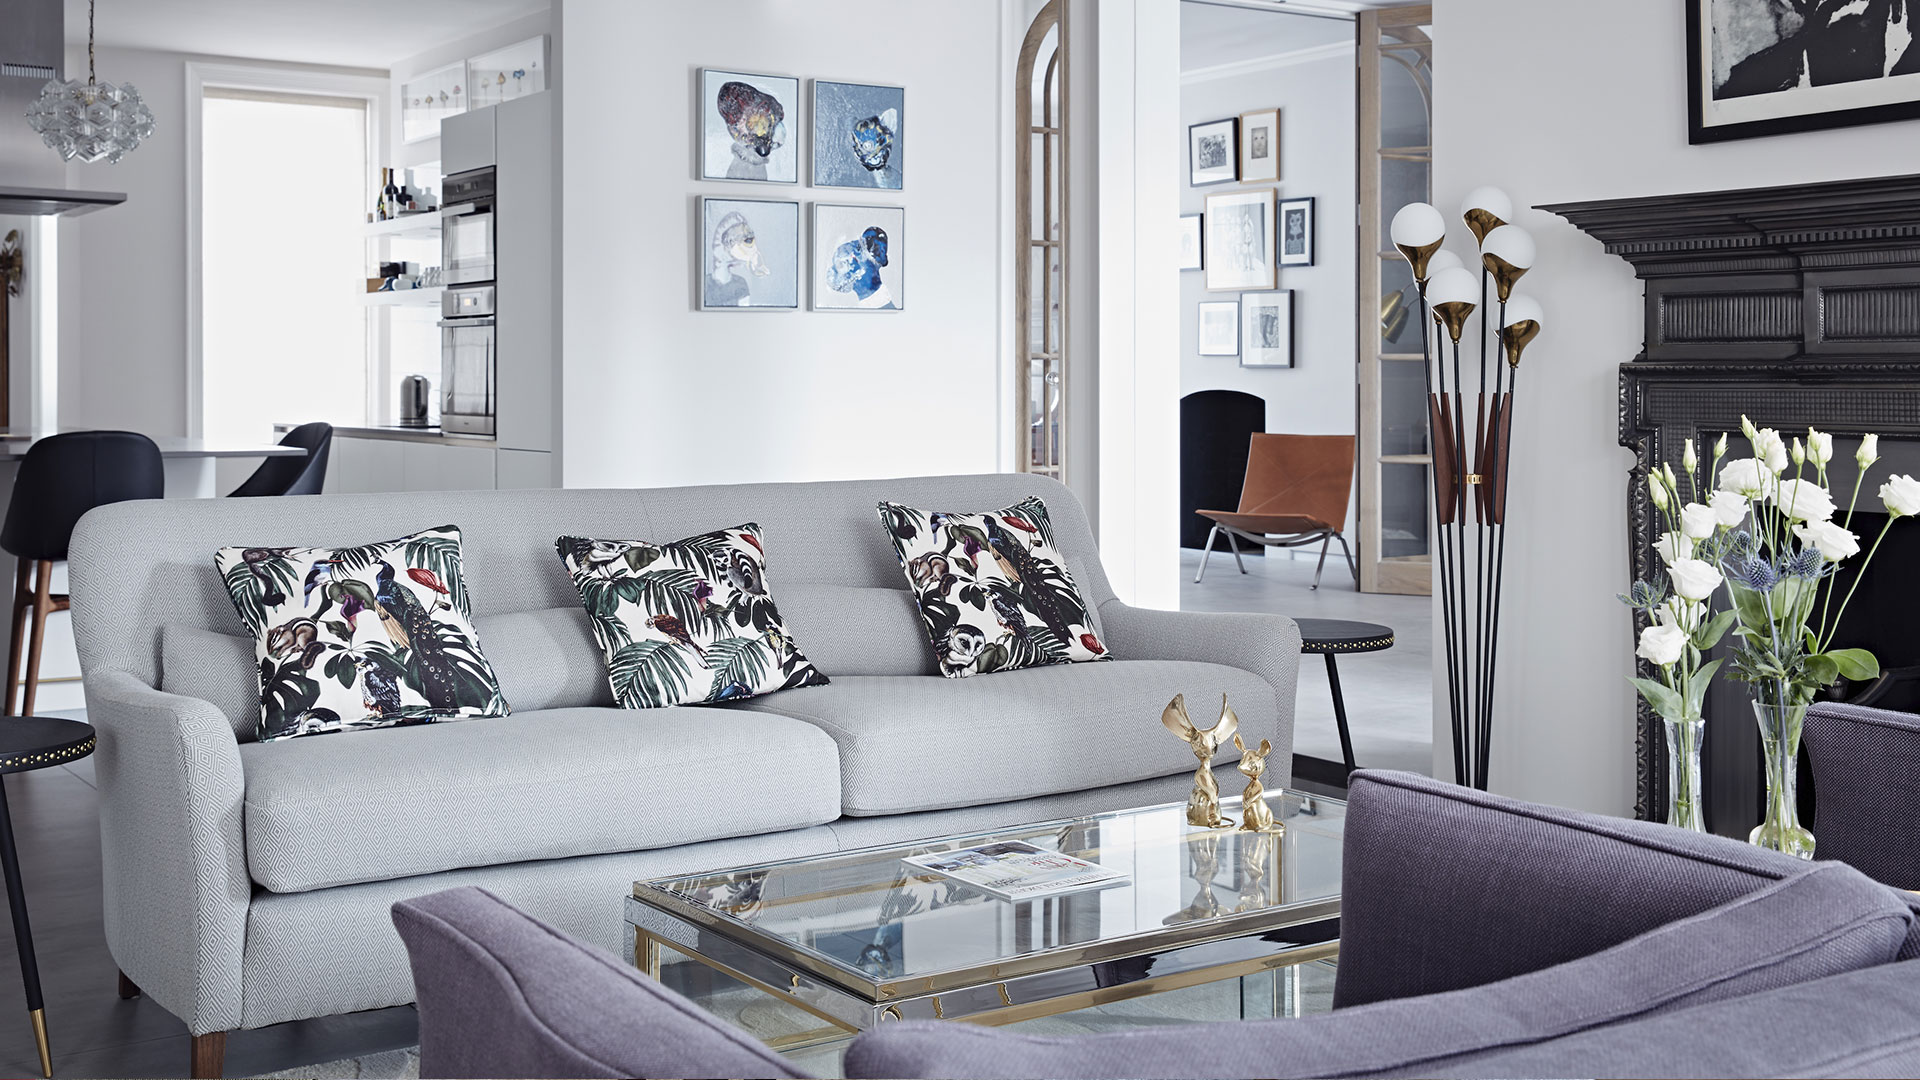 Luxury furnishings and interior design in an elegant sitting room.